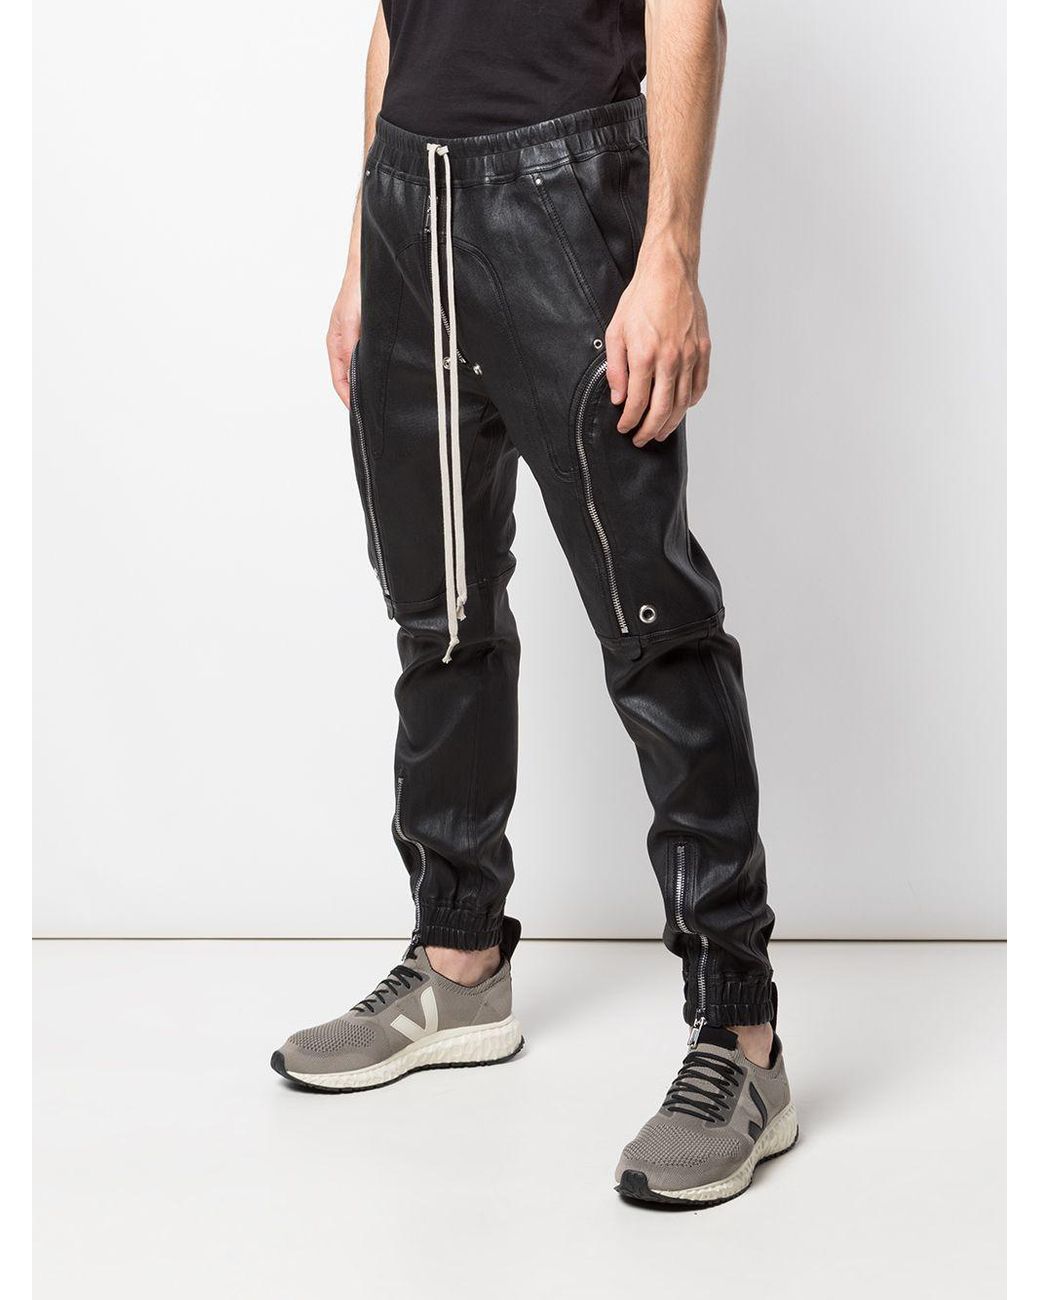 Mens Clothing Trousers Slacks and Chinos Casual trousers and trousers Rick Owens Cotton Bauhaus Cargo Pants in Black for Men 